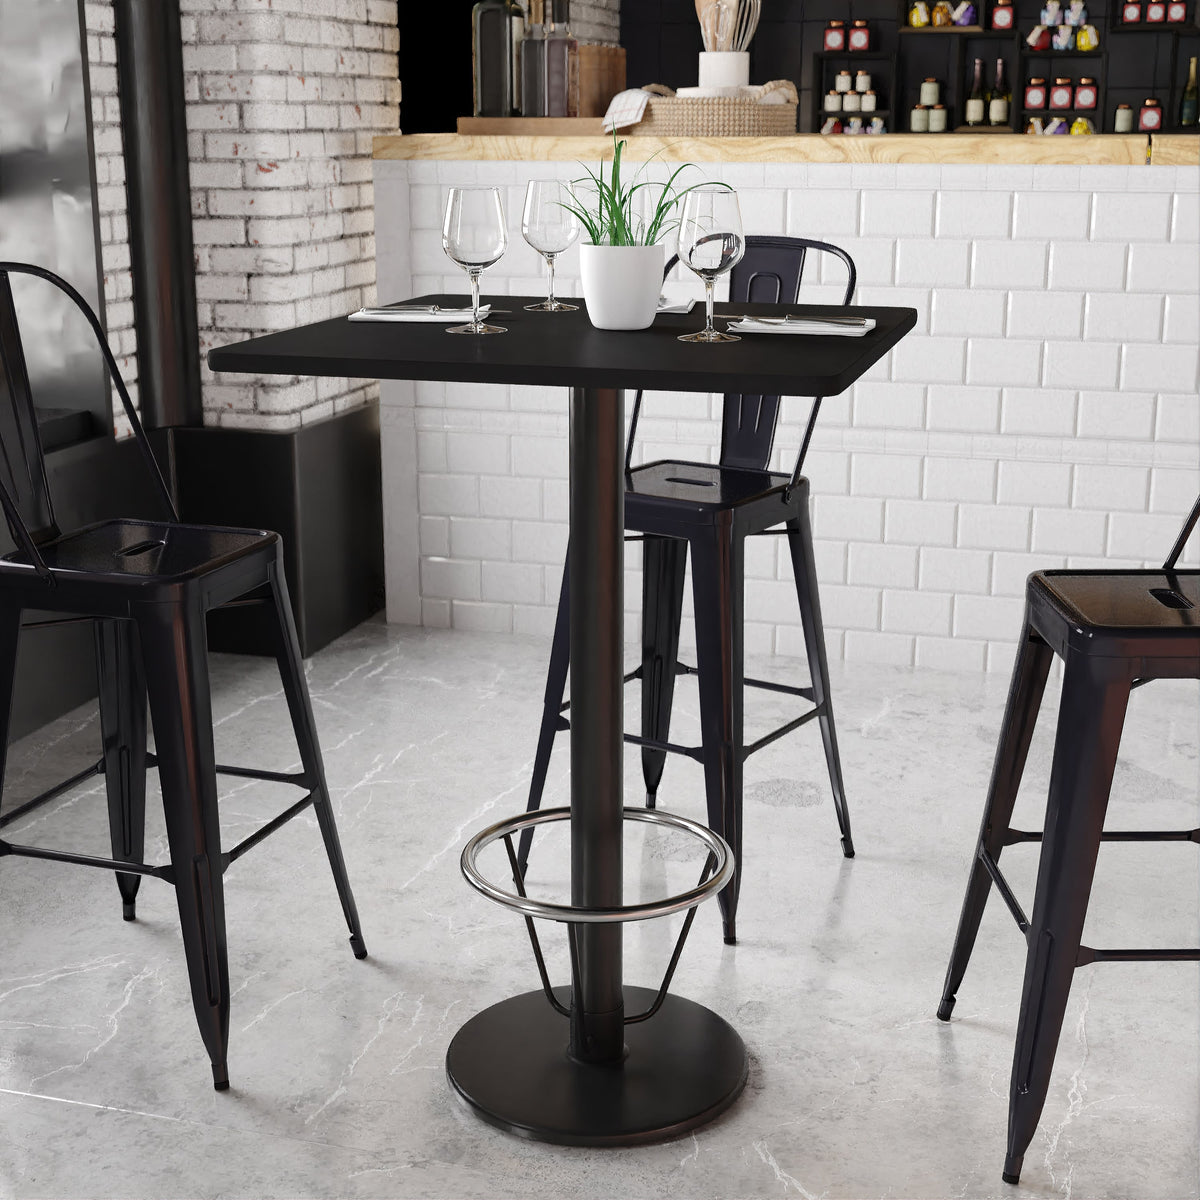 Black |#| 30inch Square Black Laminate Table Top with 18inch Round Bar Height Table Base